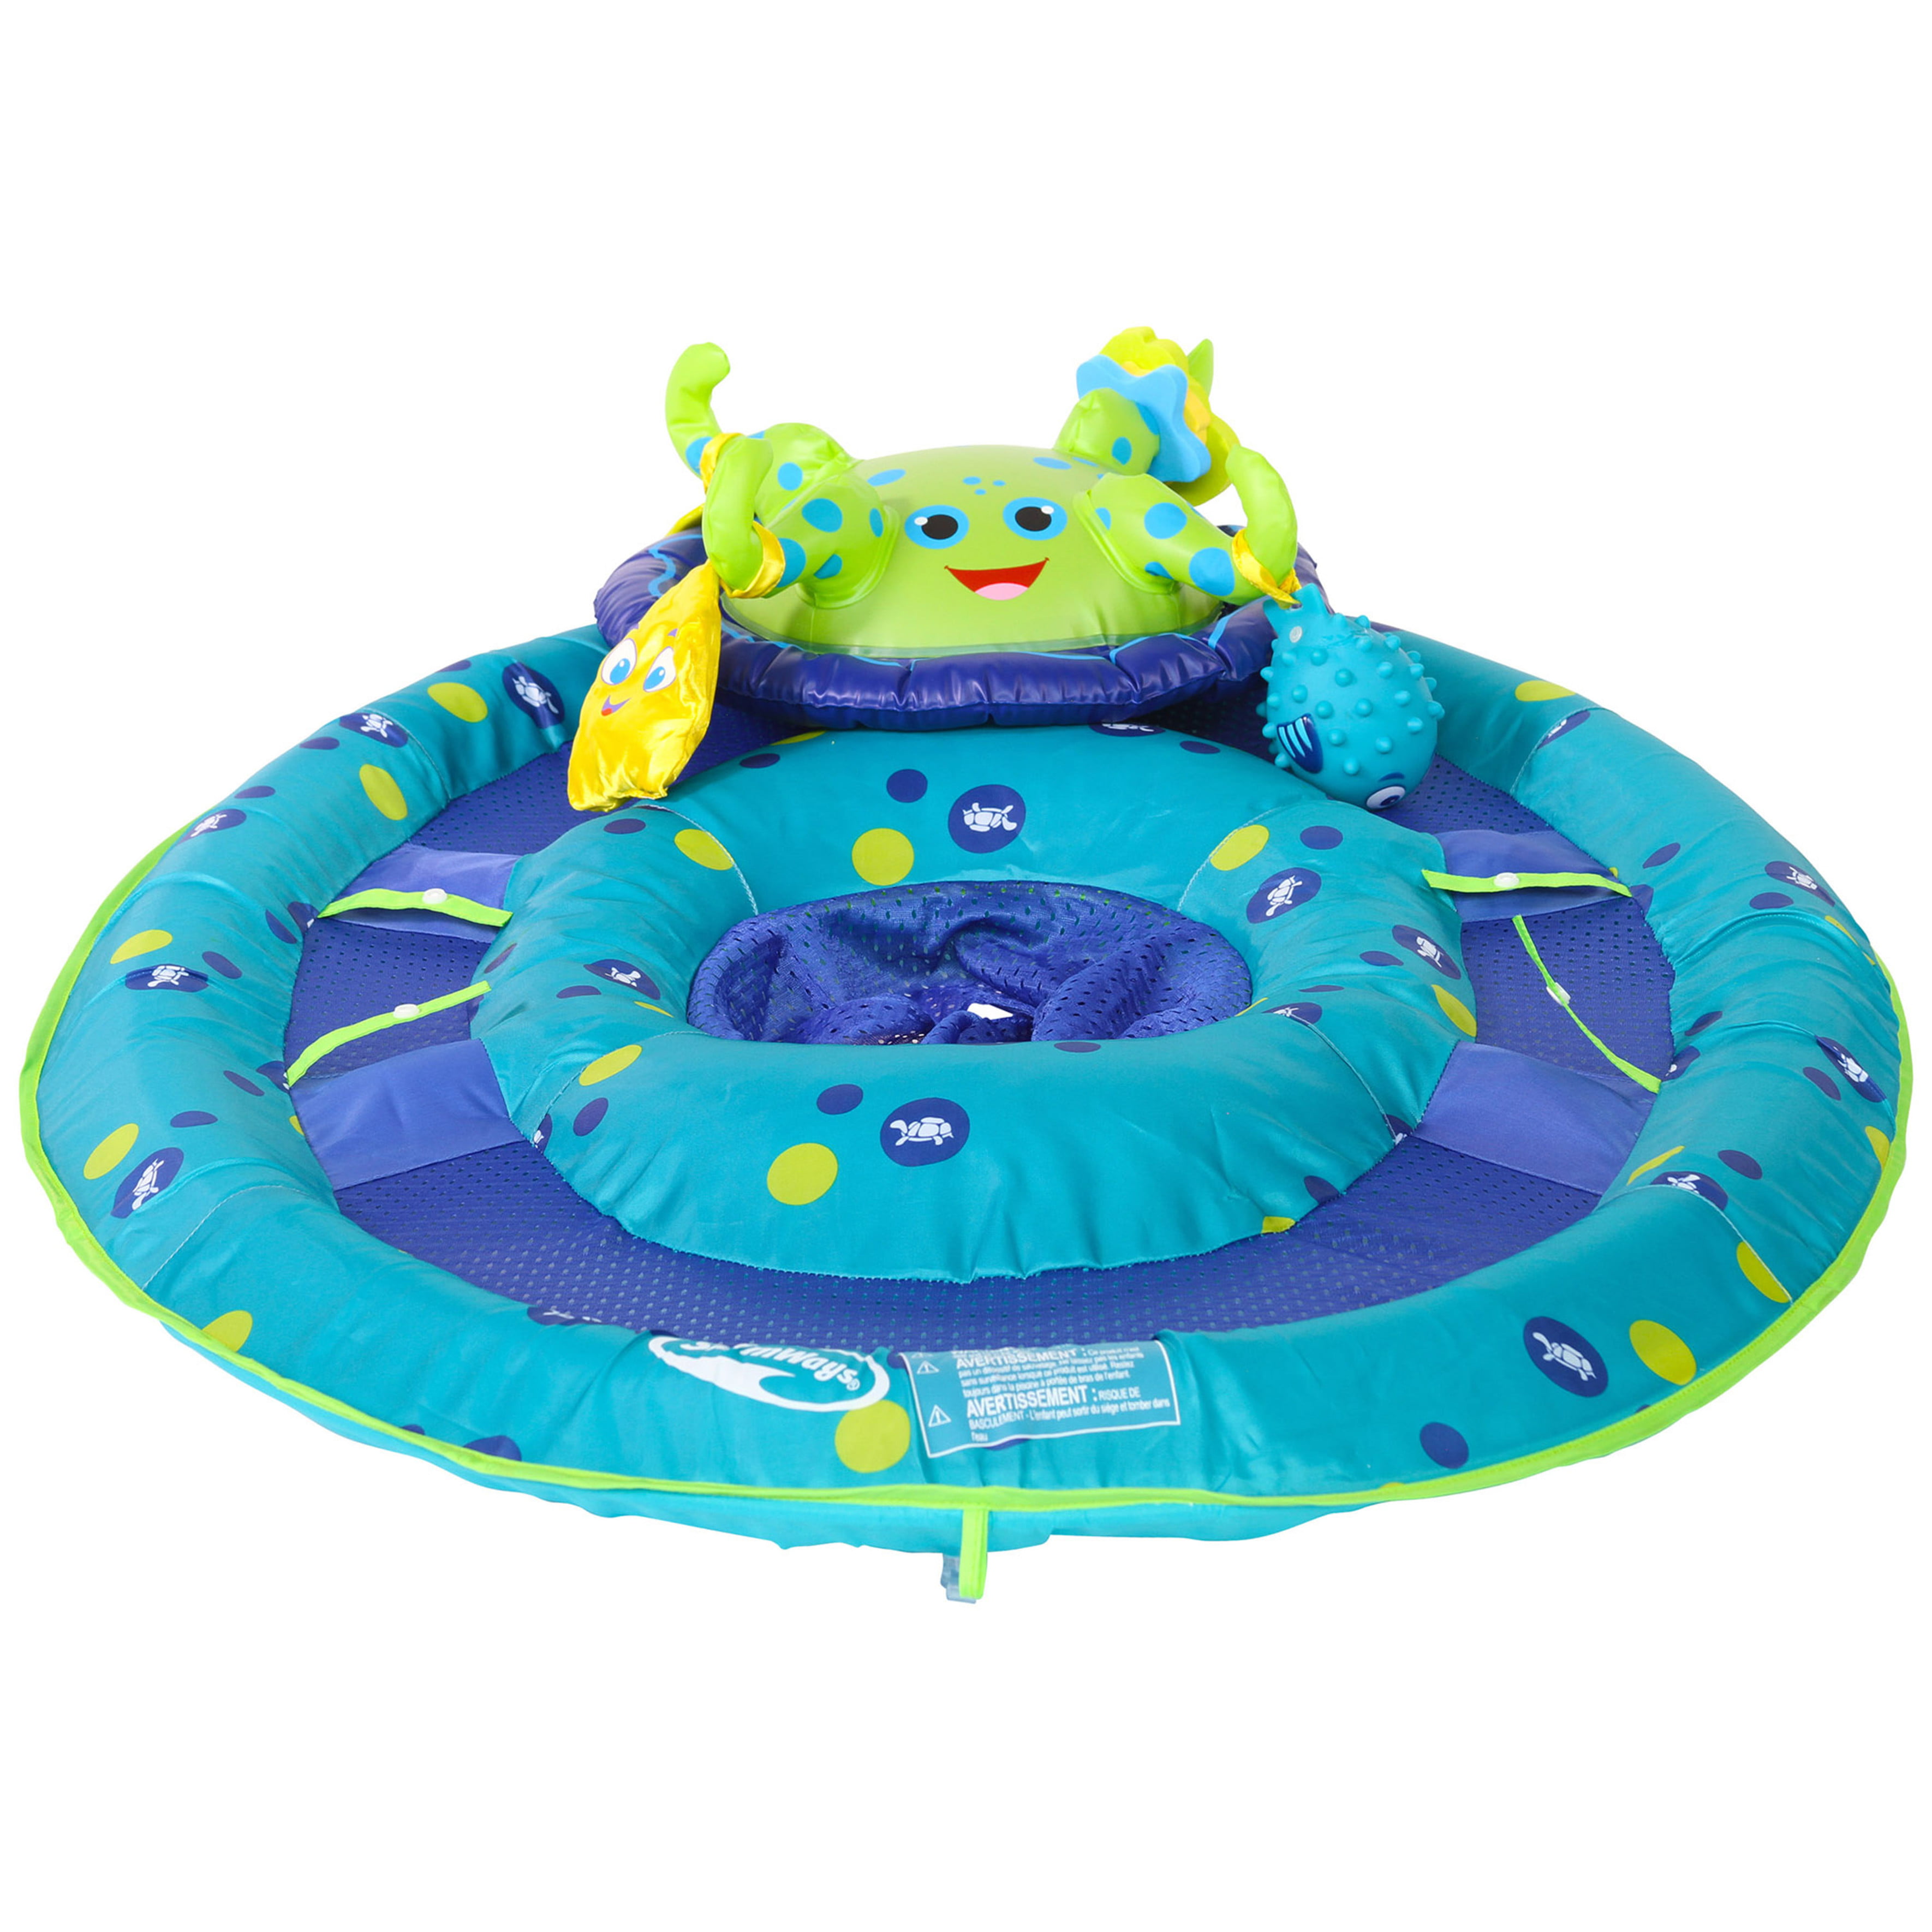 SwimWays Baby Spring Float Activity Center, Inflatable Float for Baby Boys, Blue/Green - image 4 of 8